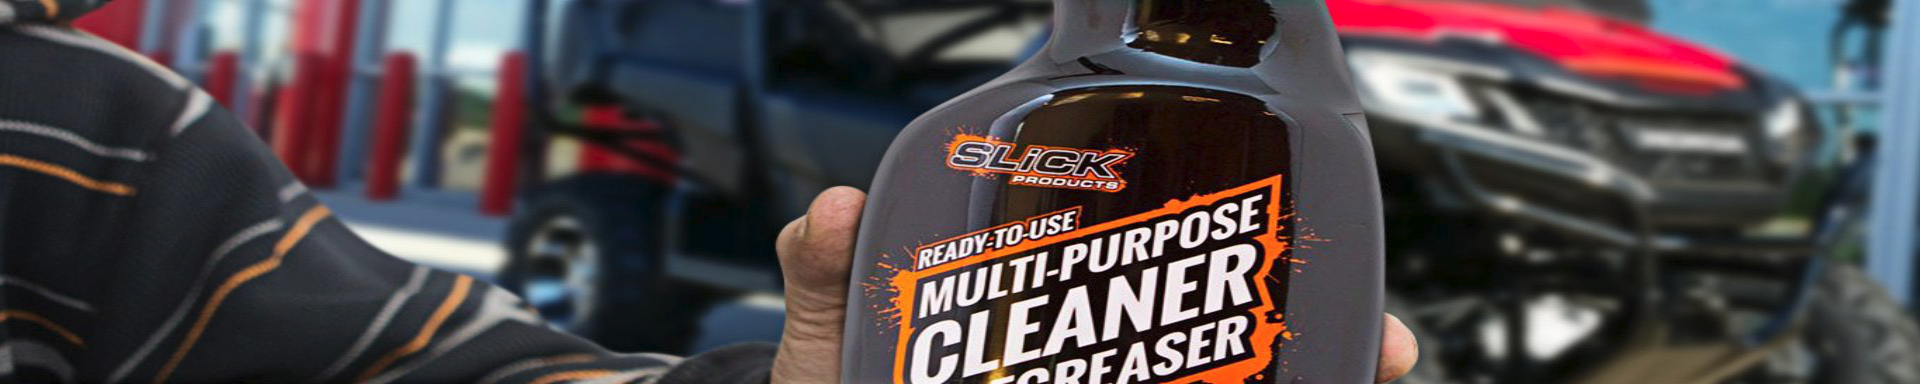 Cleaners | MunroPowersports.com | Munro Industries mp-100803070201